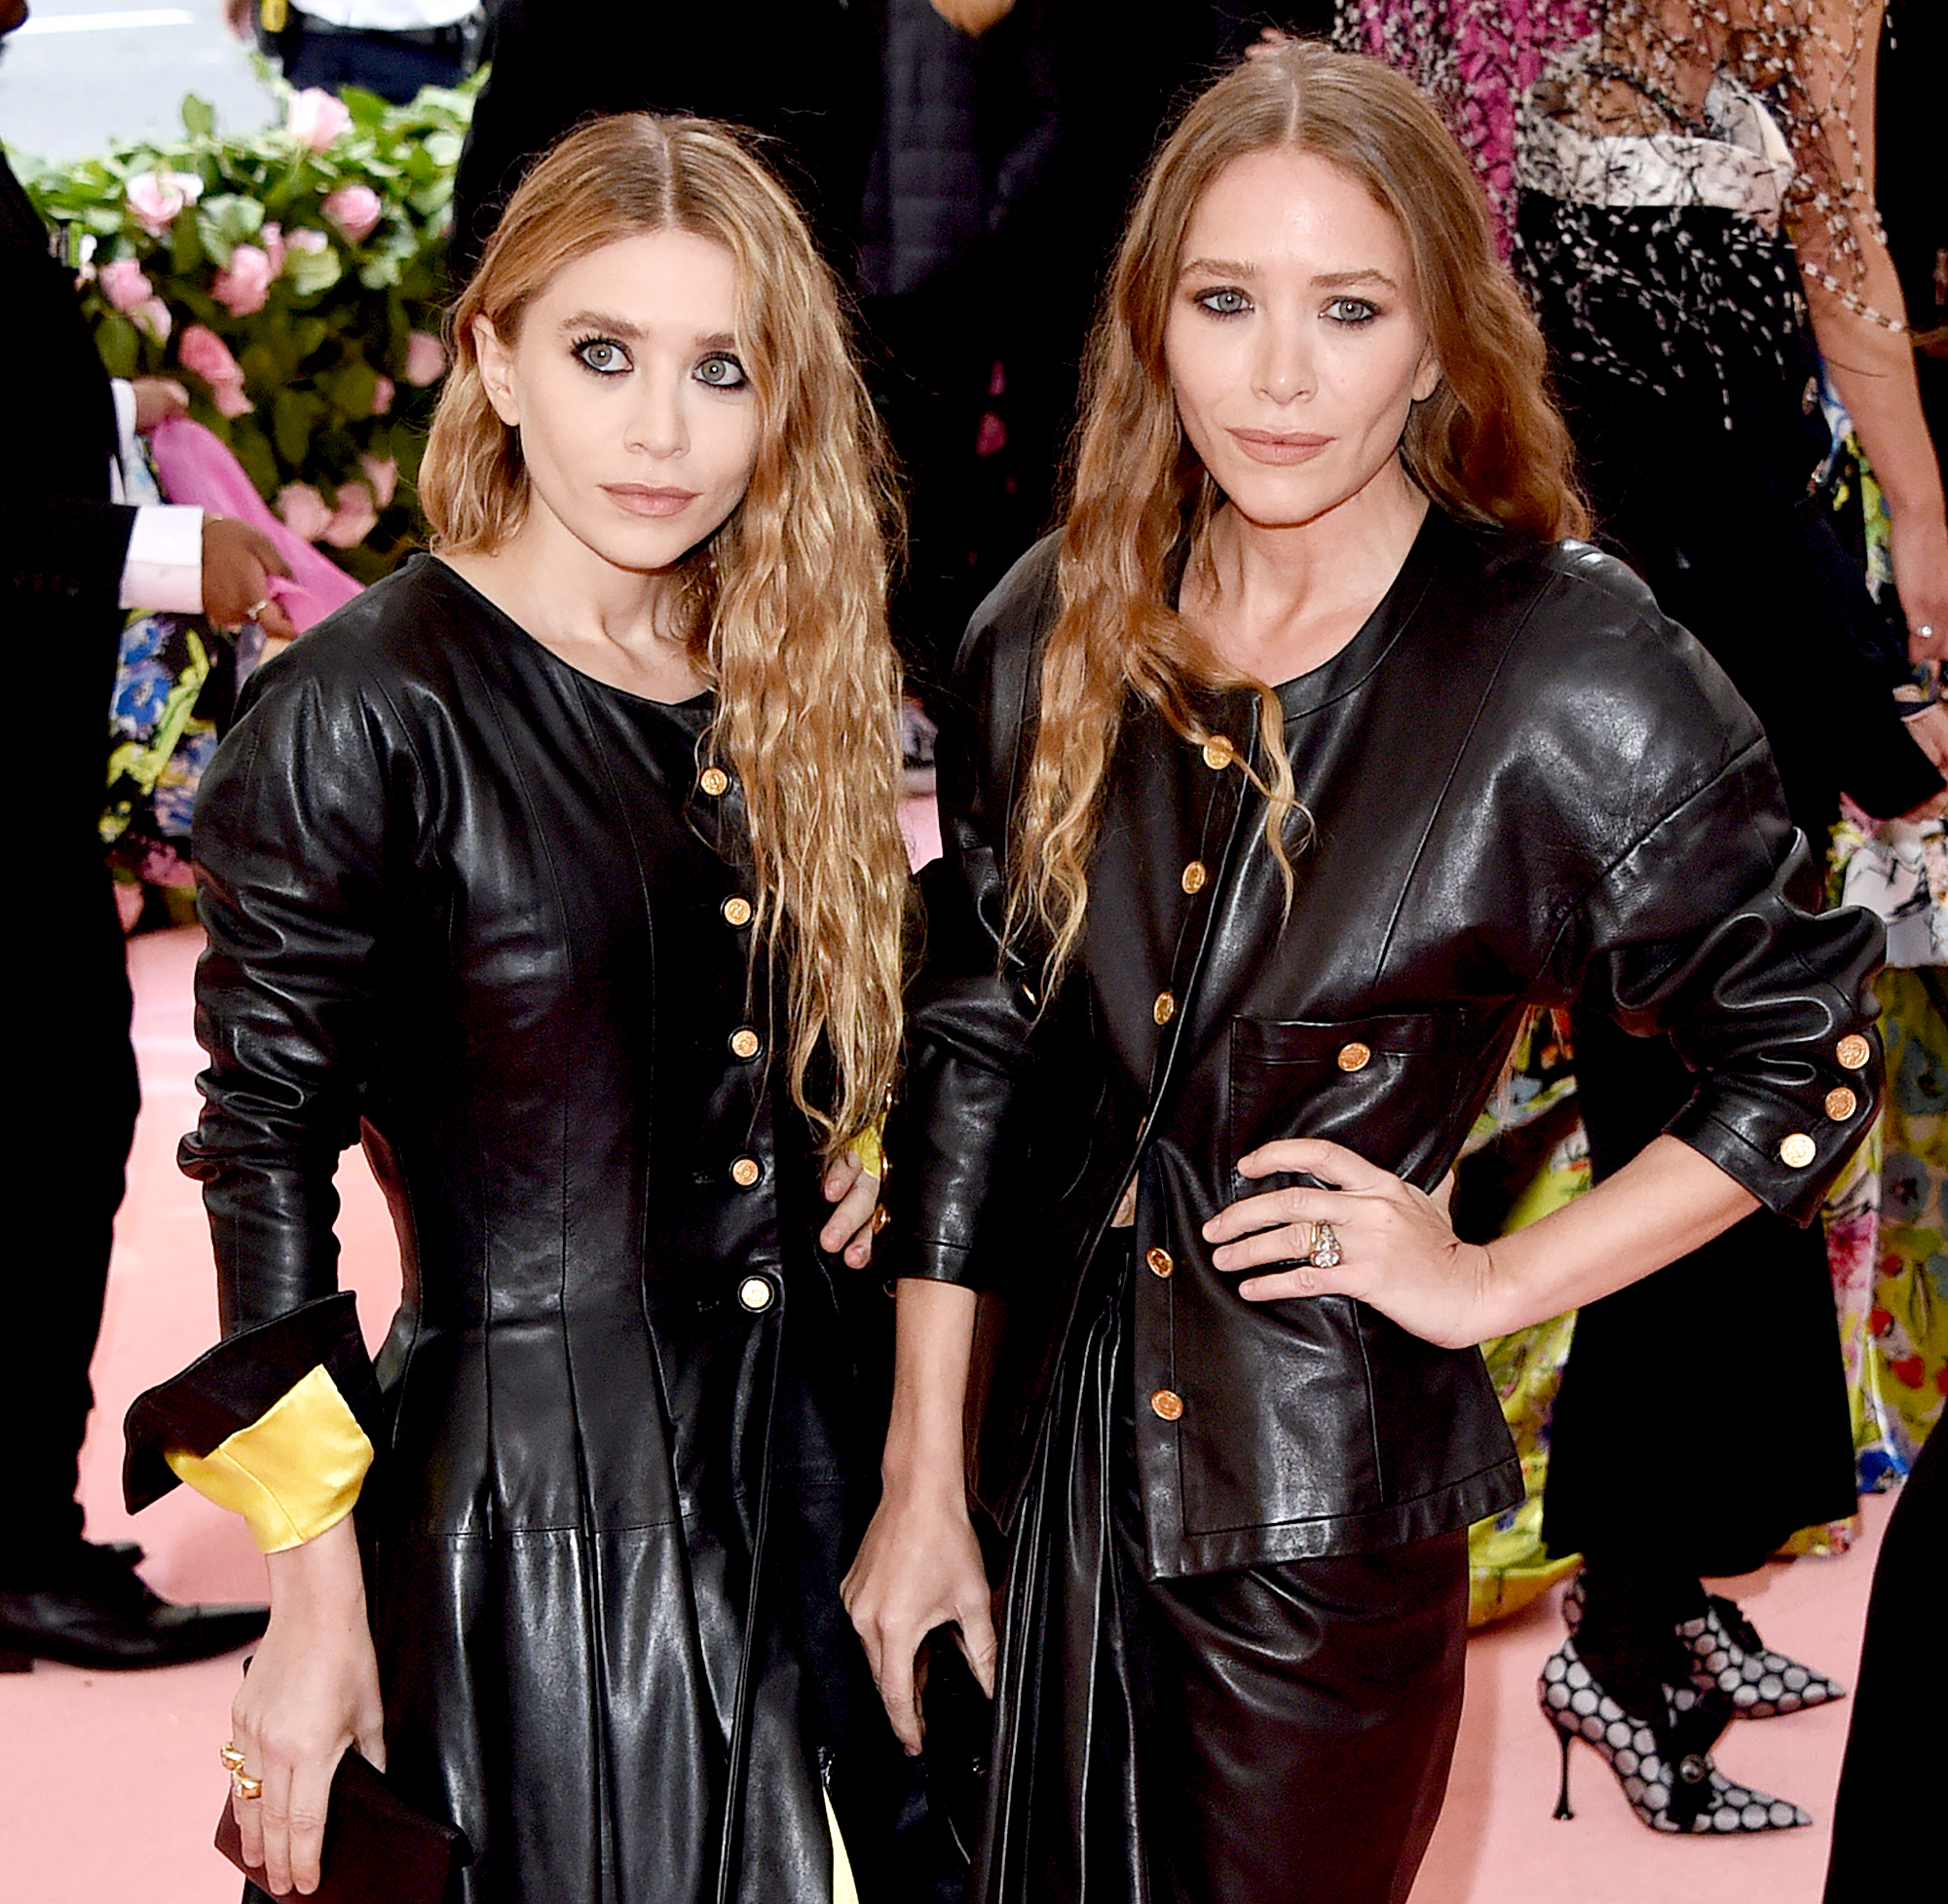 Met Gala 2019: Mary Kate and Ashley Olsen Matching Dresses